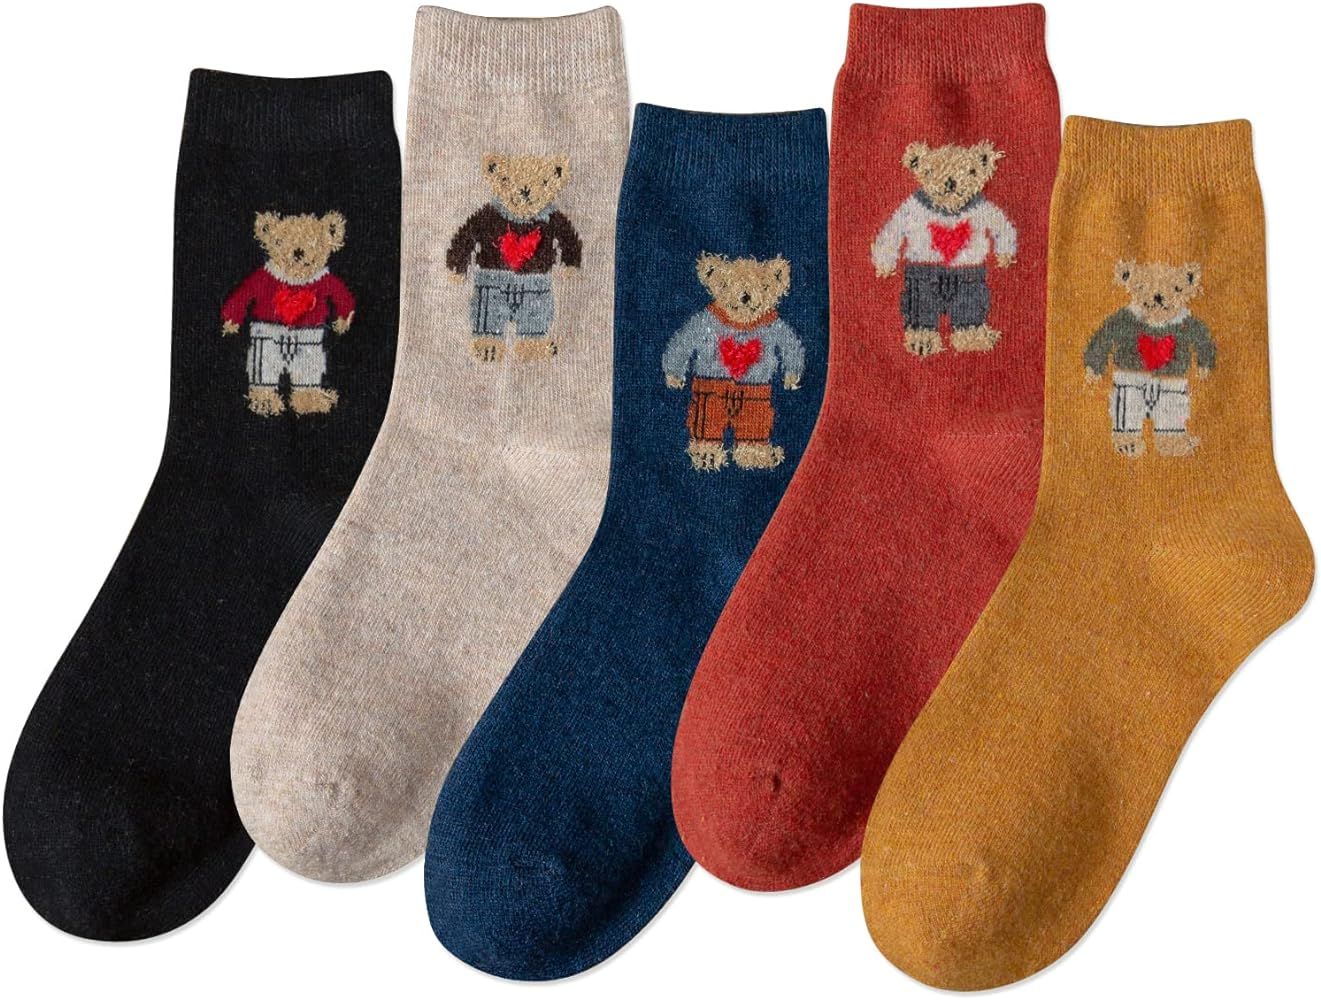 Cute Warm Wool Socks for Women Super Cozy Thick Crew Winter Socks Gifts, 5 Pairs | Amazon (US)